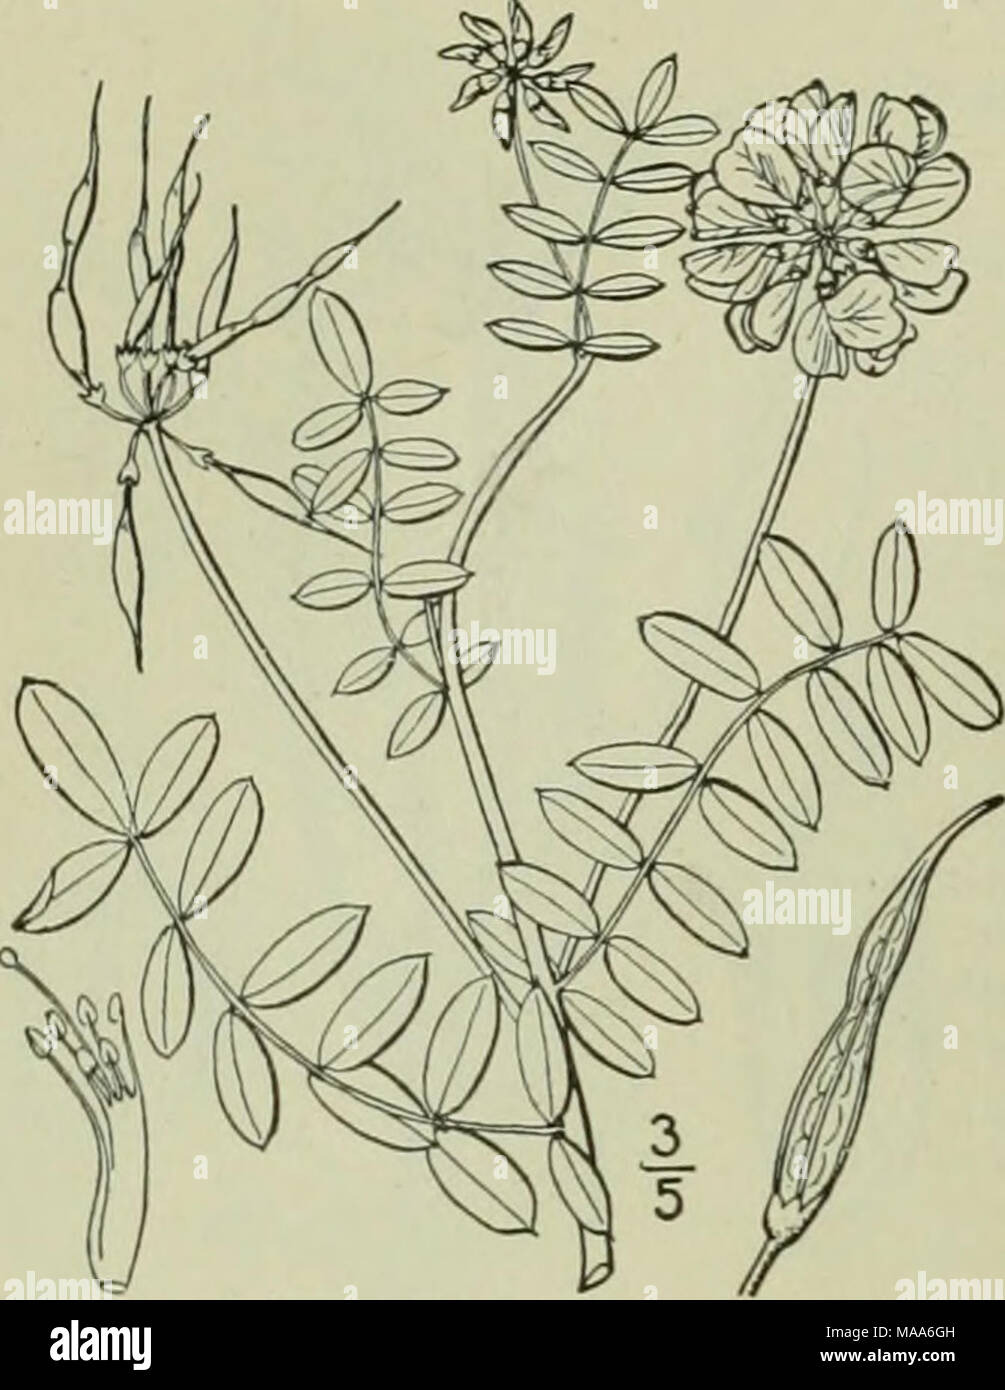 . An illustrated flora of the northern United States, Canada and the British possessions : from Newfoundland to the parallel of the southern boundary of Virginia and from the Atlantic Ocean westward to the 102nd meridian . I. Coronilla varia L. Coronilla. Axseed. Axvvort. Fig. 2570. Coronilla varia L. Sp. PI. 743. 1753. Perennial, straggling or ascending, glabrous, branching, l°-2° long. Leaves sessile; leaflets 11-25, oblong or obovate, obtuse and mucronate at the apex, narrowed or rounded at the base, 6&quot;-9&quot; long, ii&quot;-3&quot; wide; peduncles longer than the leaves; flowers 4&qu Stock Photo